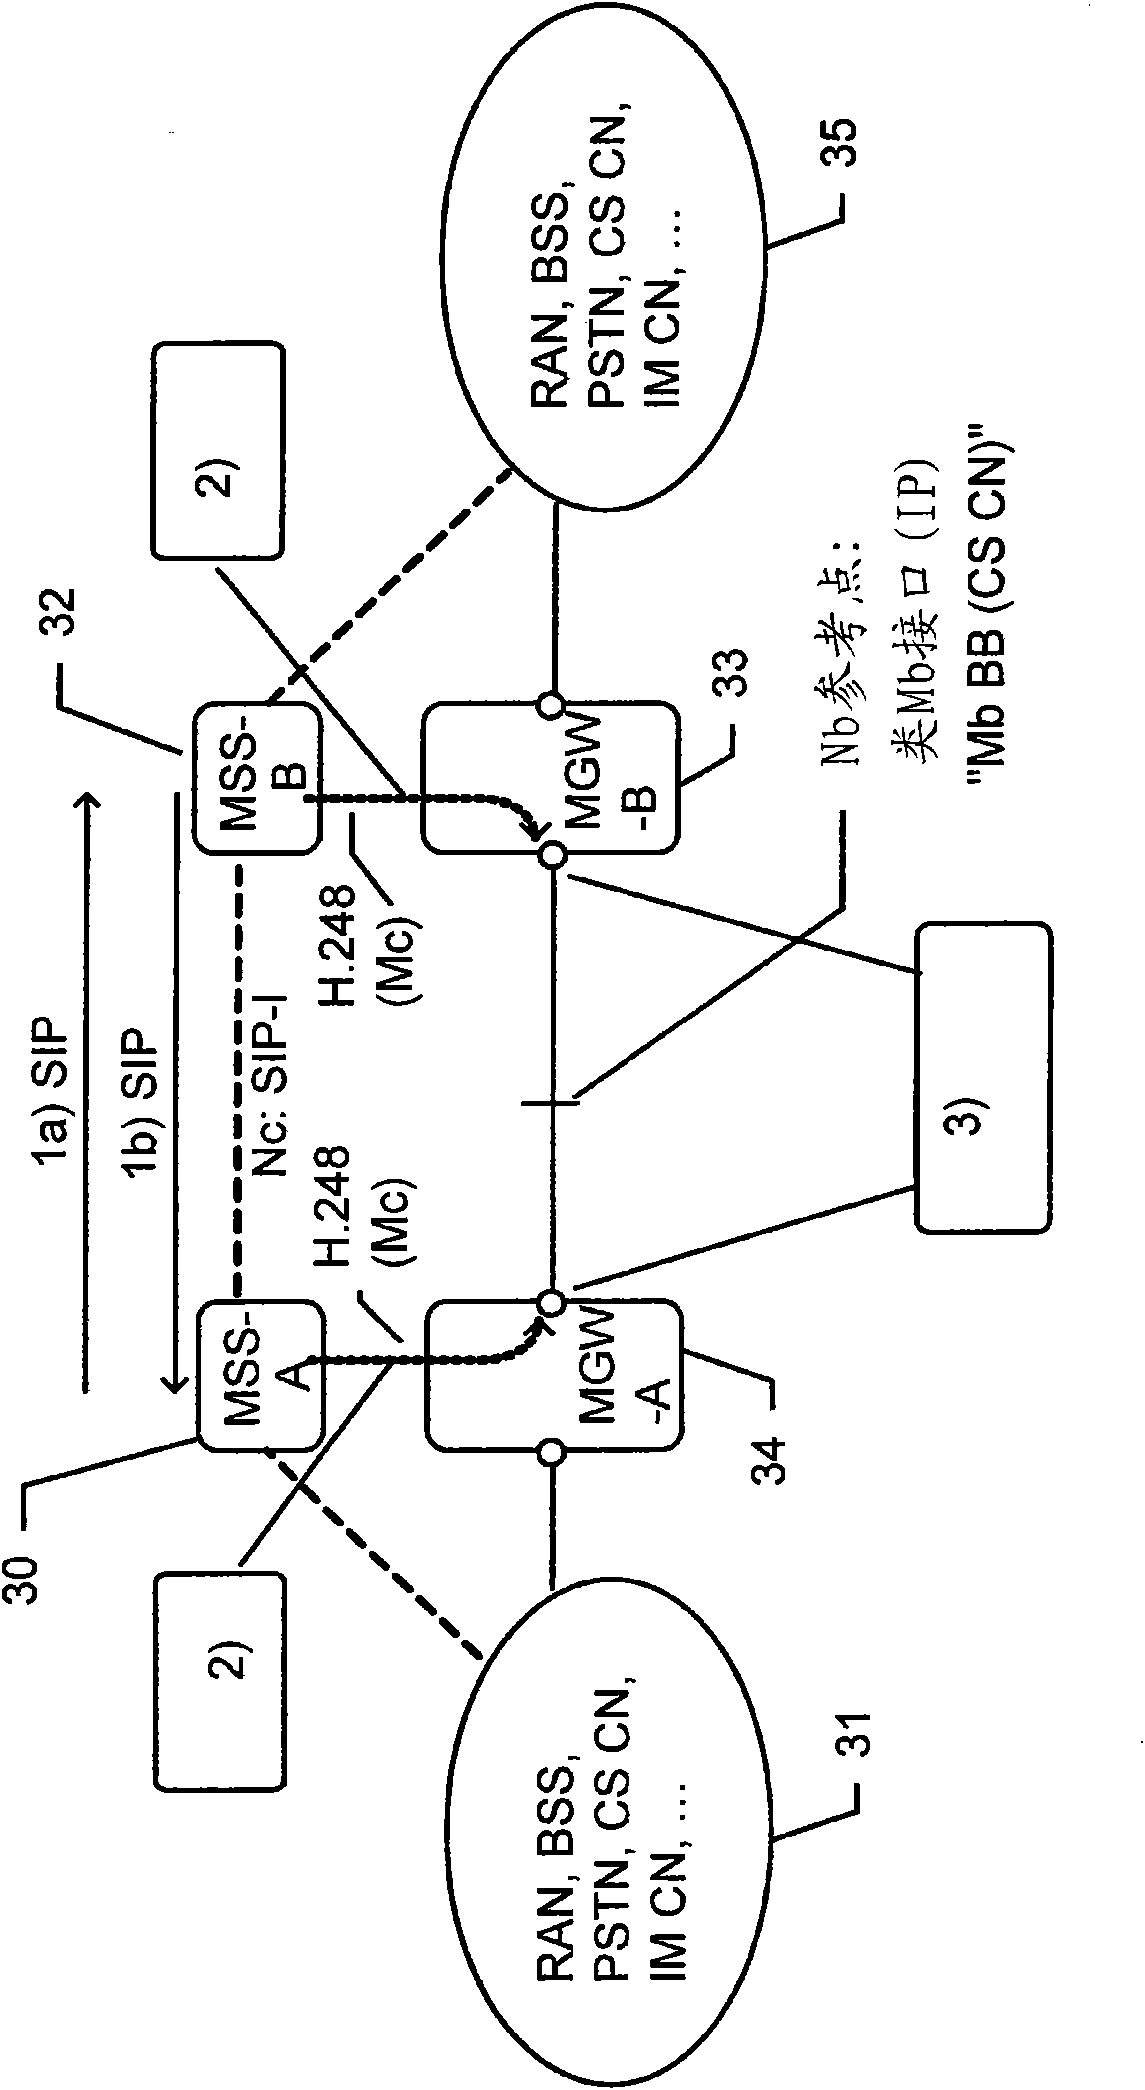 Different ip interfaces in a communication network system